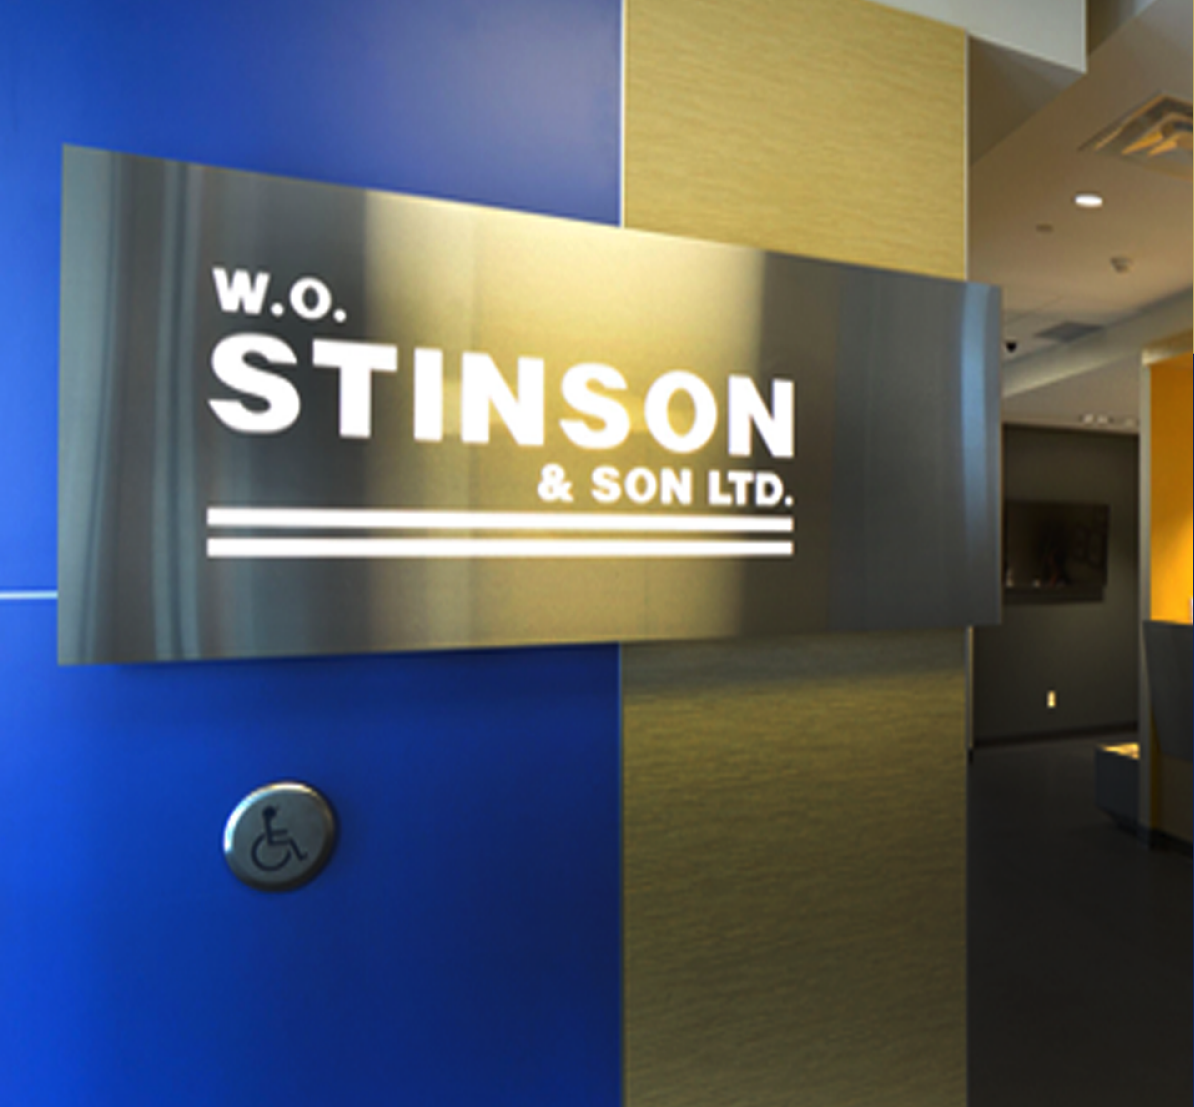 Image of the inside of the Stinson corporate head office entryway with a stainless steel sign with the Stinson logo on it